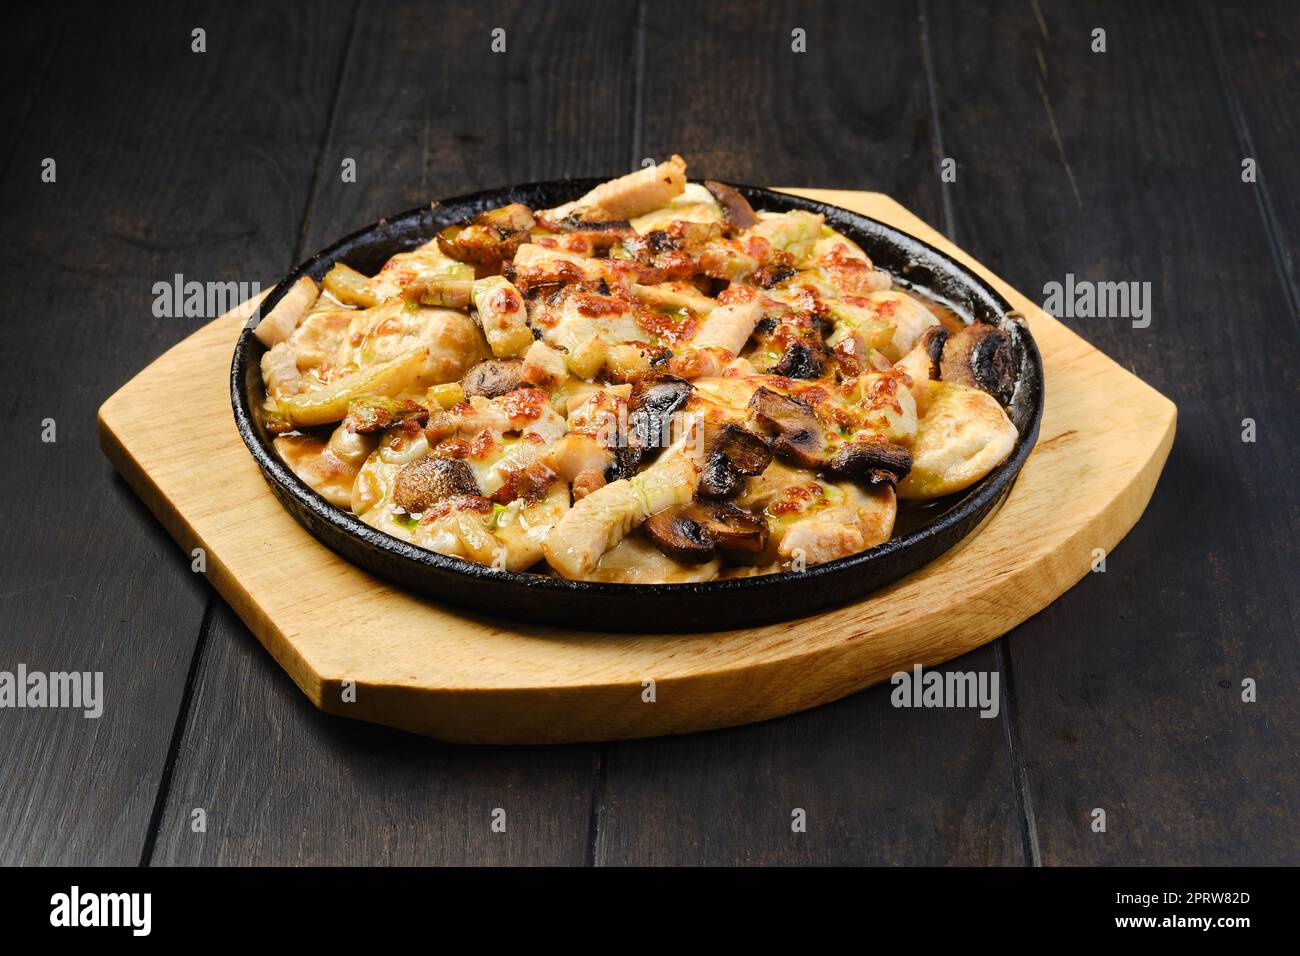 Slices of eggplant baked with champignon and cheese Stock Photo